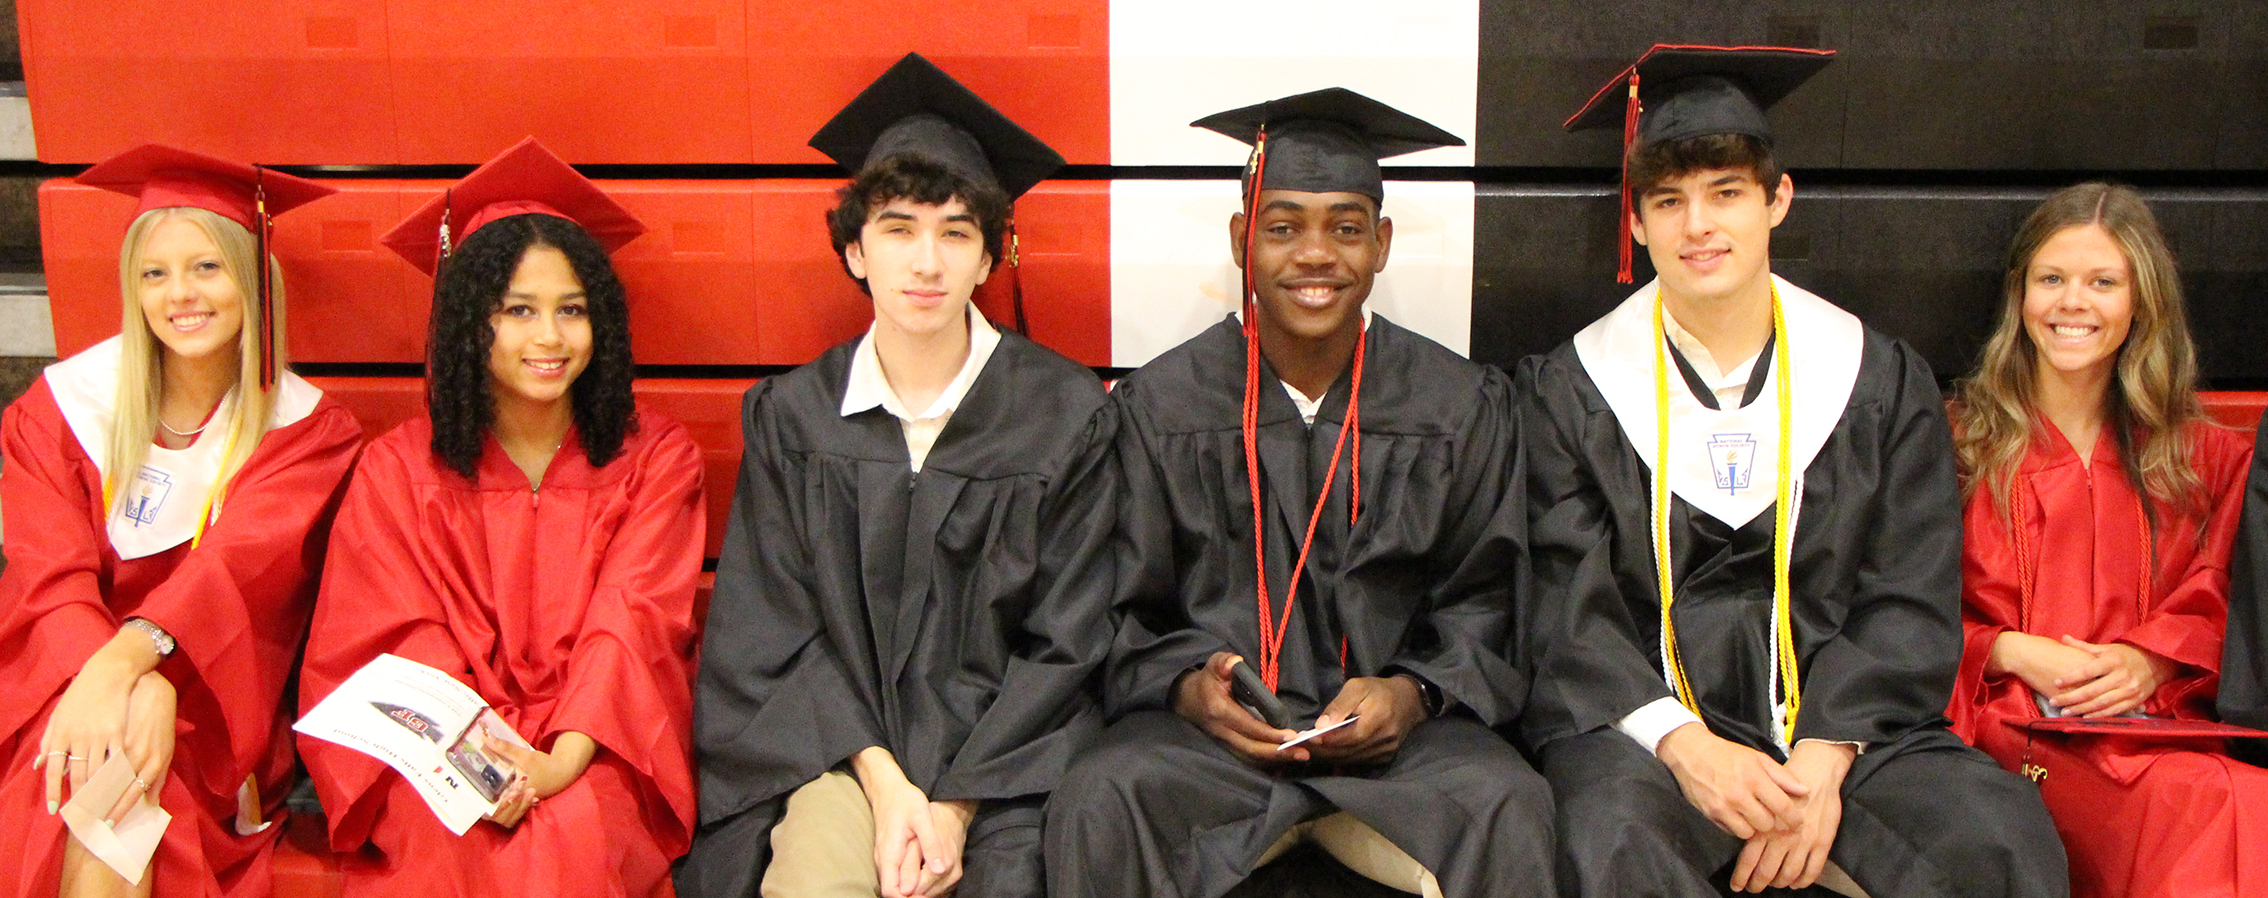 several high school graduates in their red and black caps and gowns prepare for the ceremony in the high school gym